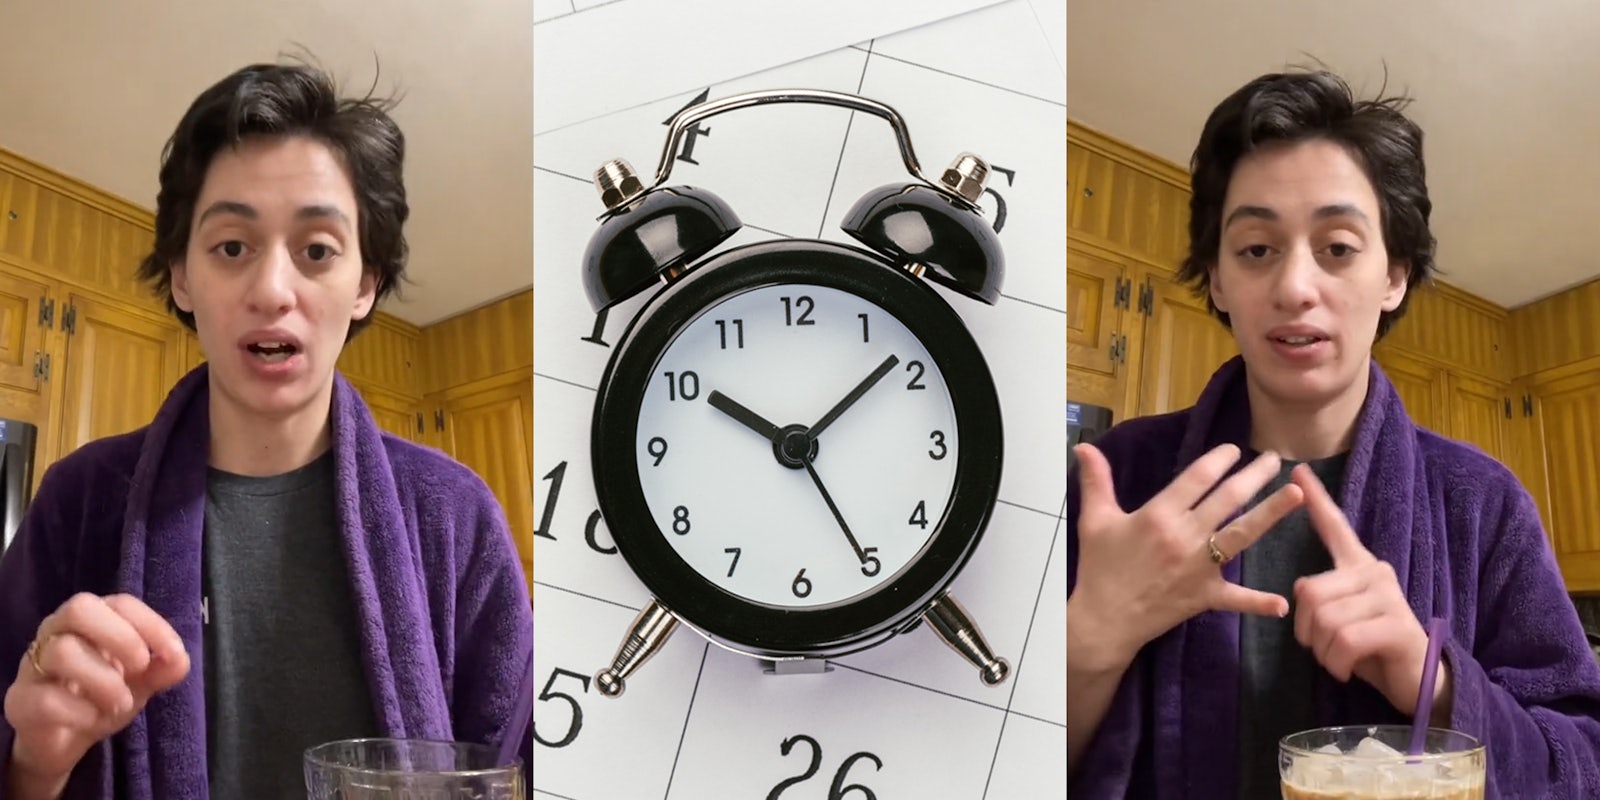 person speaking in front of wooden design cabinets (l) clock in front of calendar (c) person speaking in front of wooden design cabinets counting talking points on fingers (r)